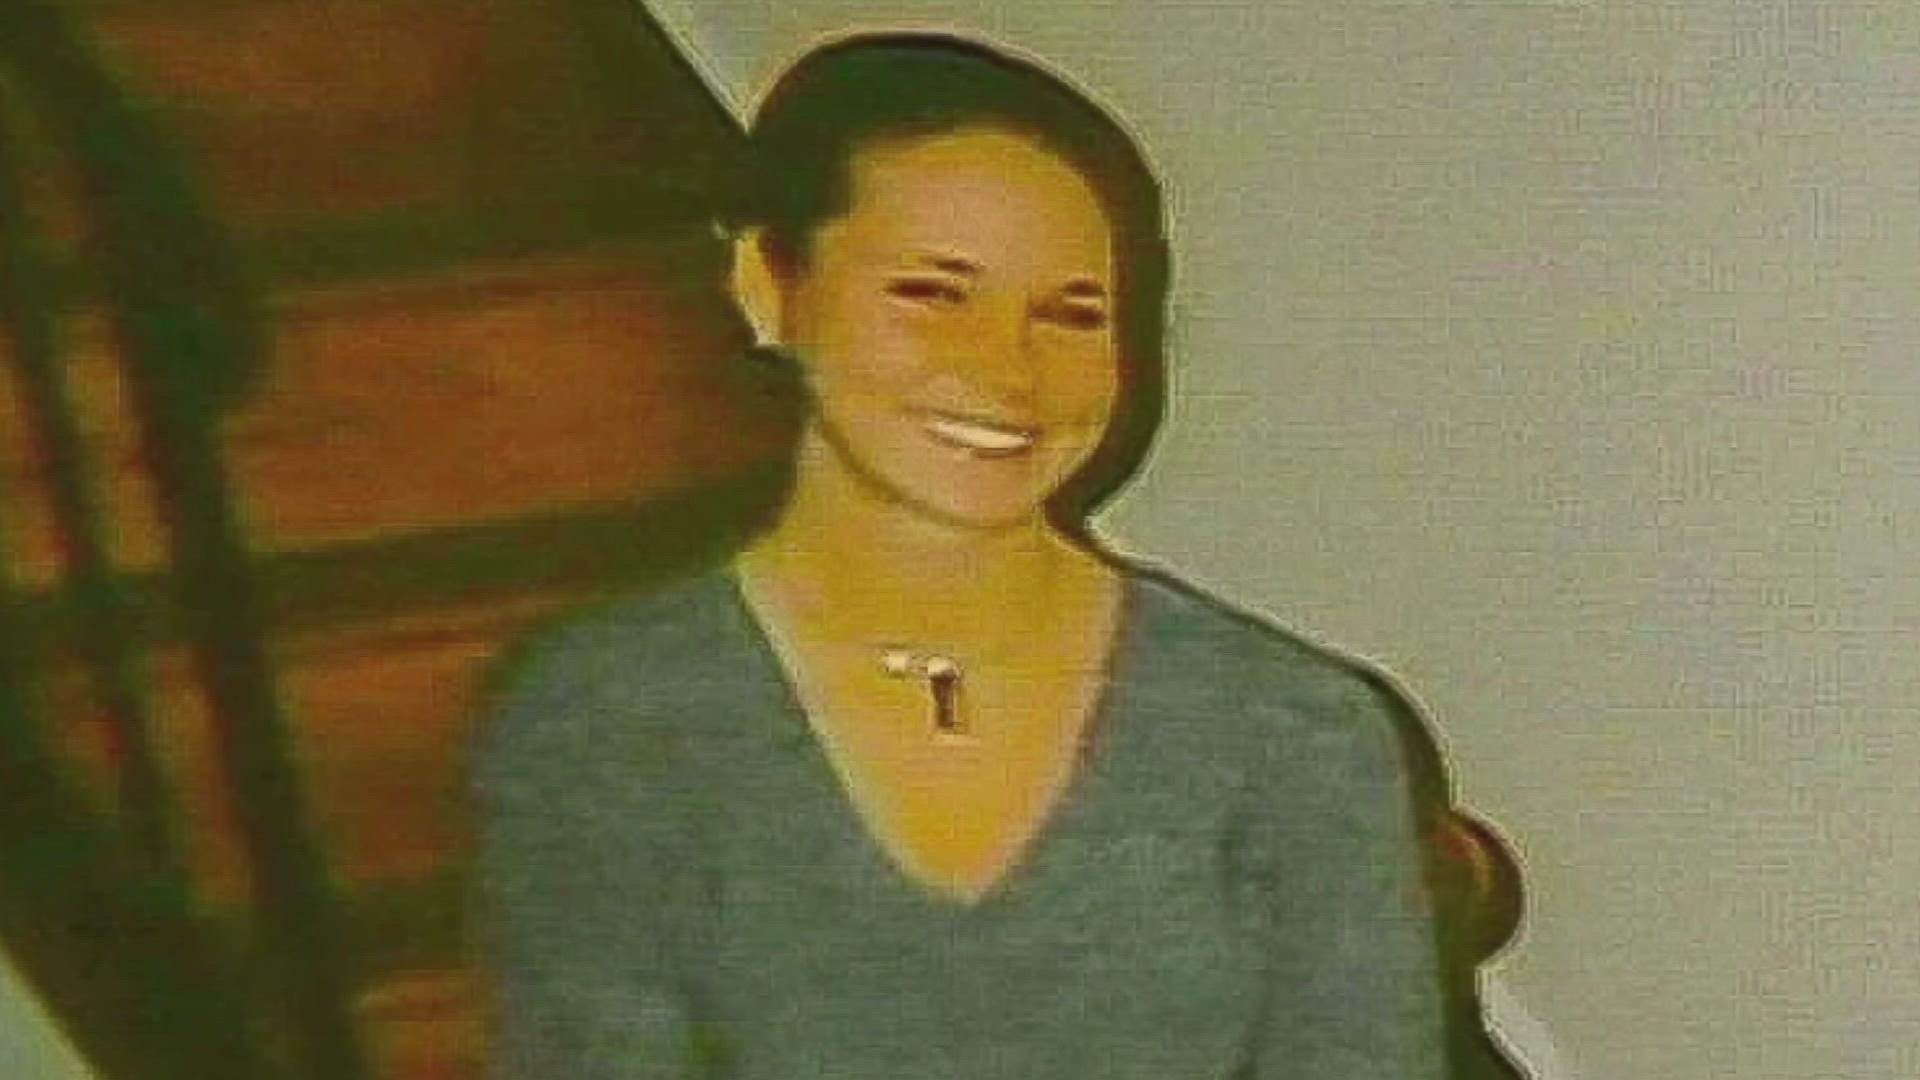 Maura Murray disappeared in 2004, following a single-vehicle crash in North Haverhill, New Hampshire, but her family continues to hope for answers.